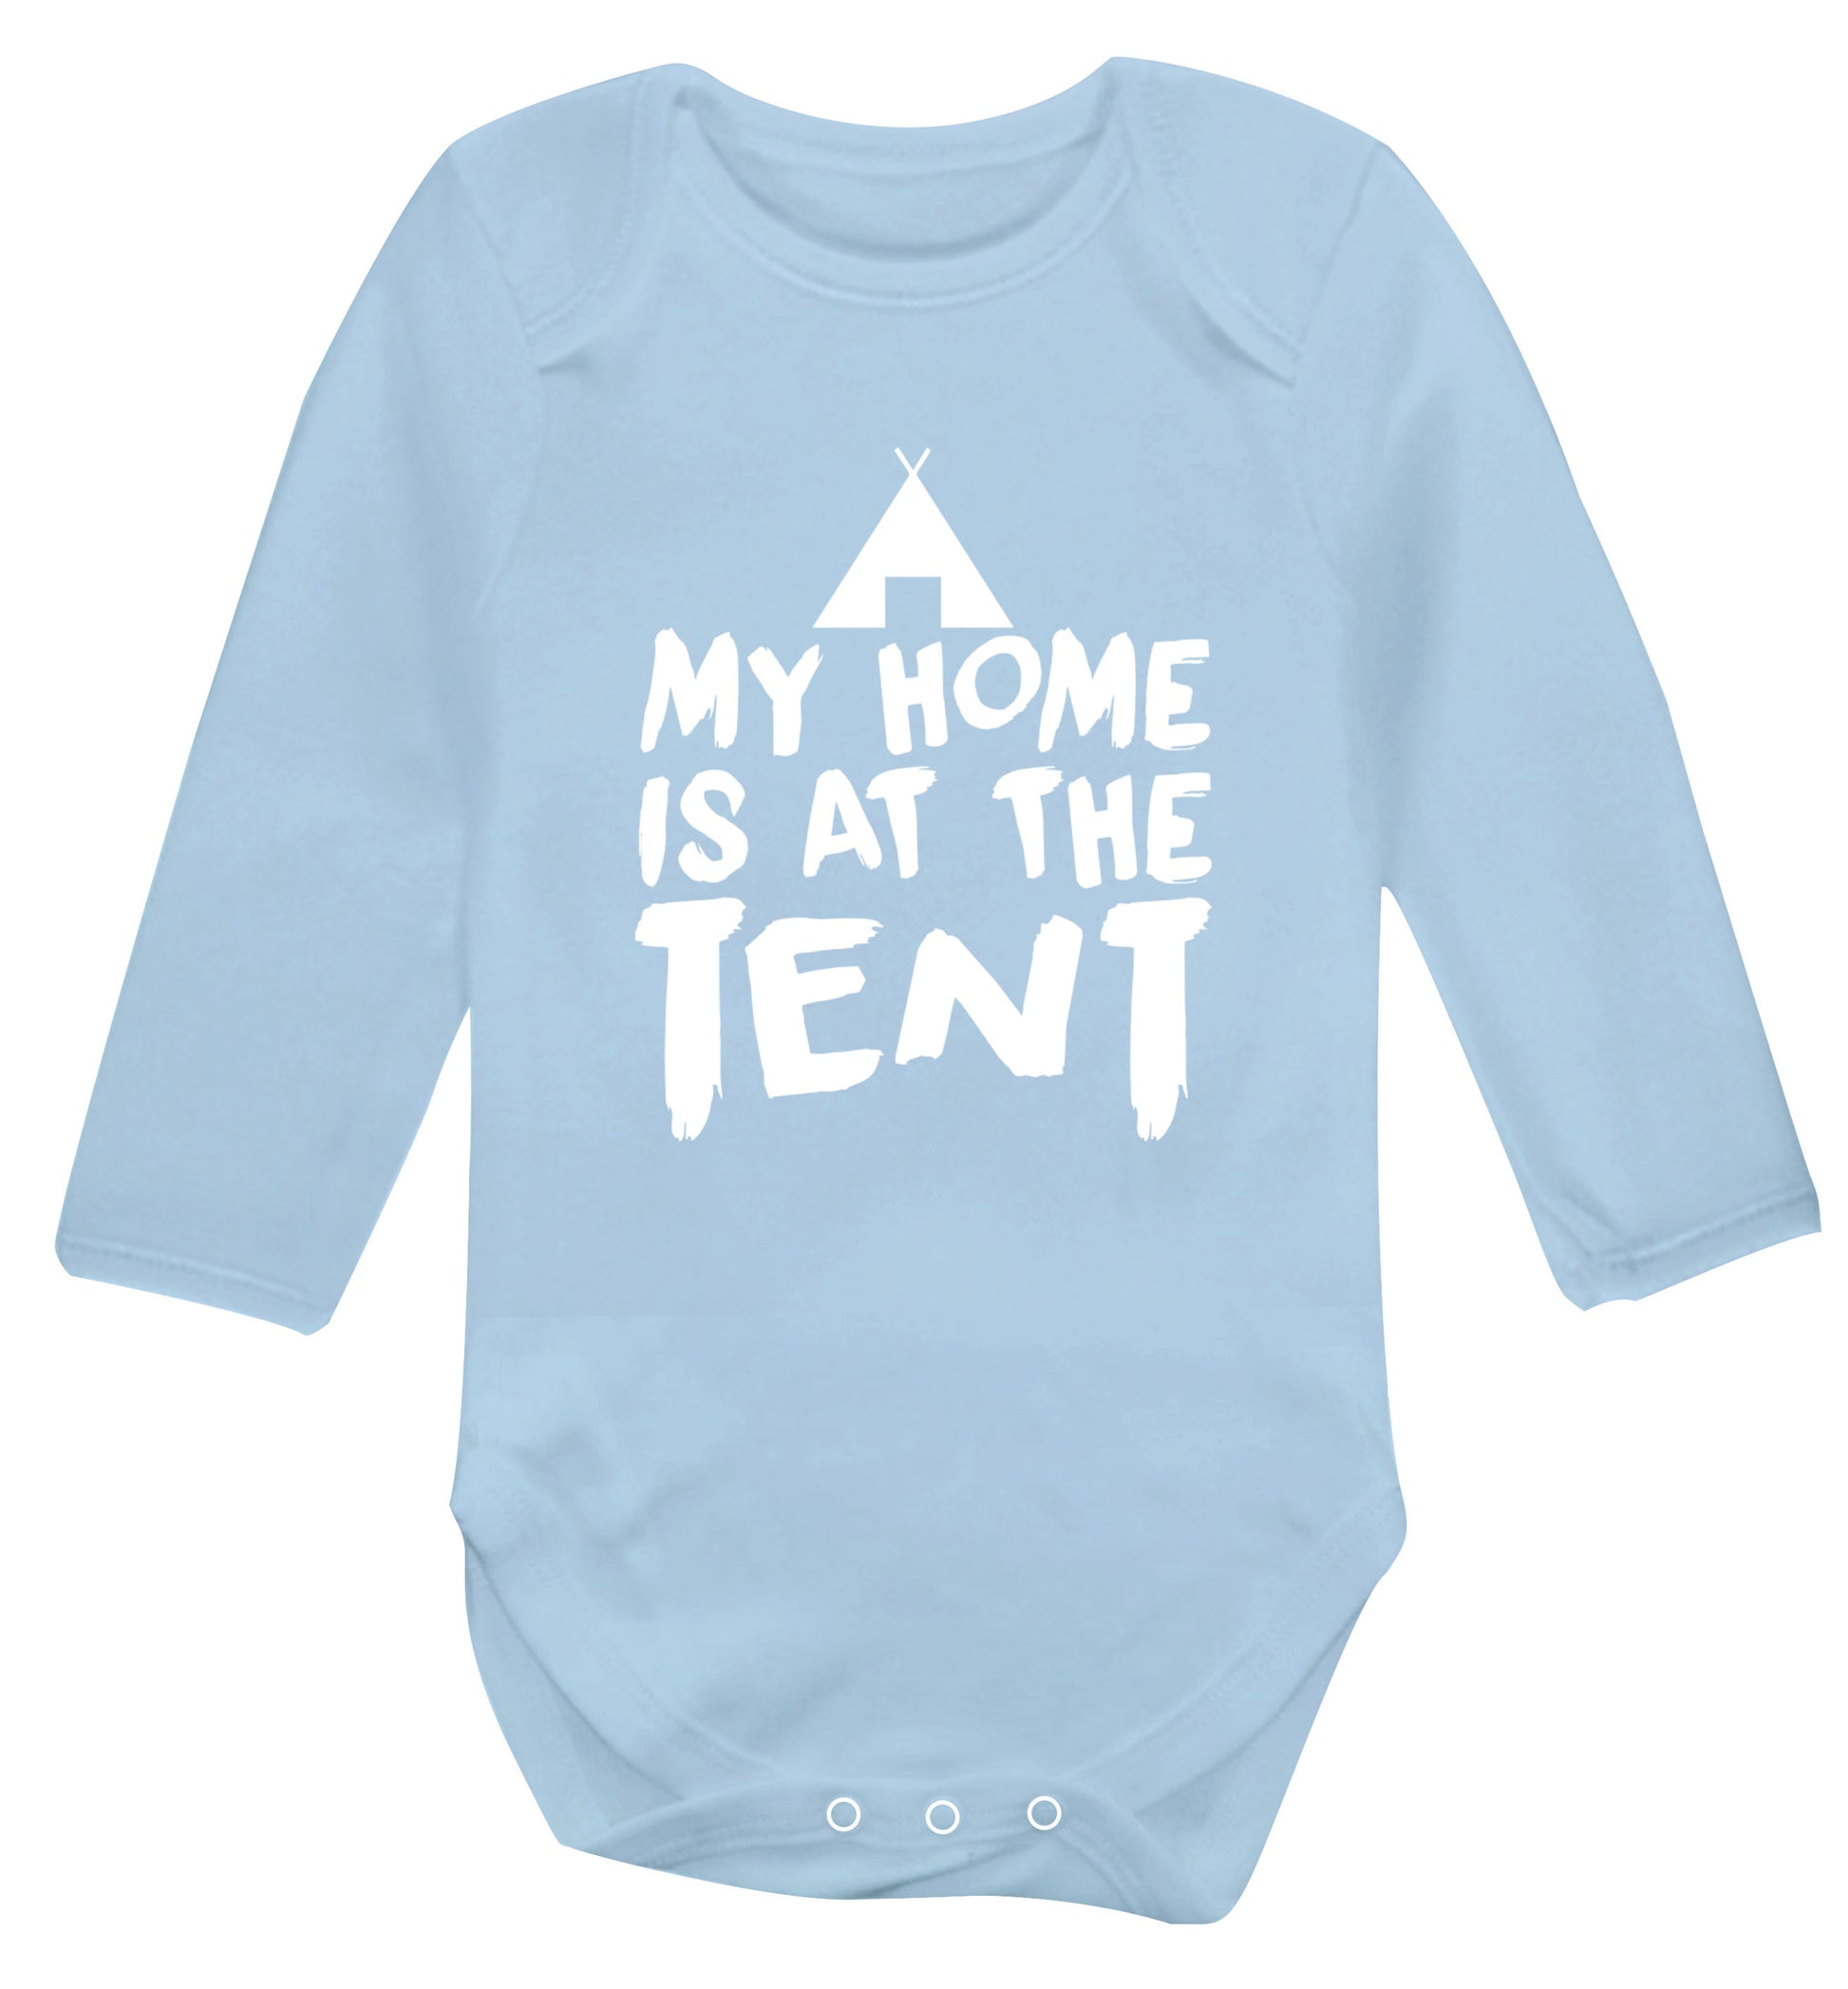 My home is at the tent Baby Vest long sleeved pale blue 6-12 months